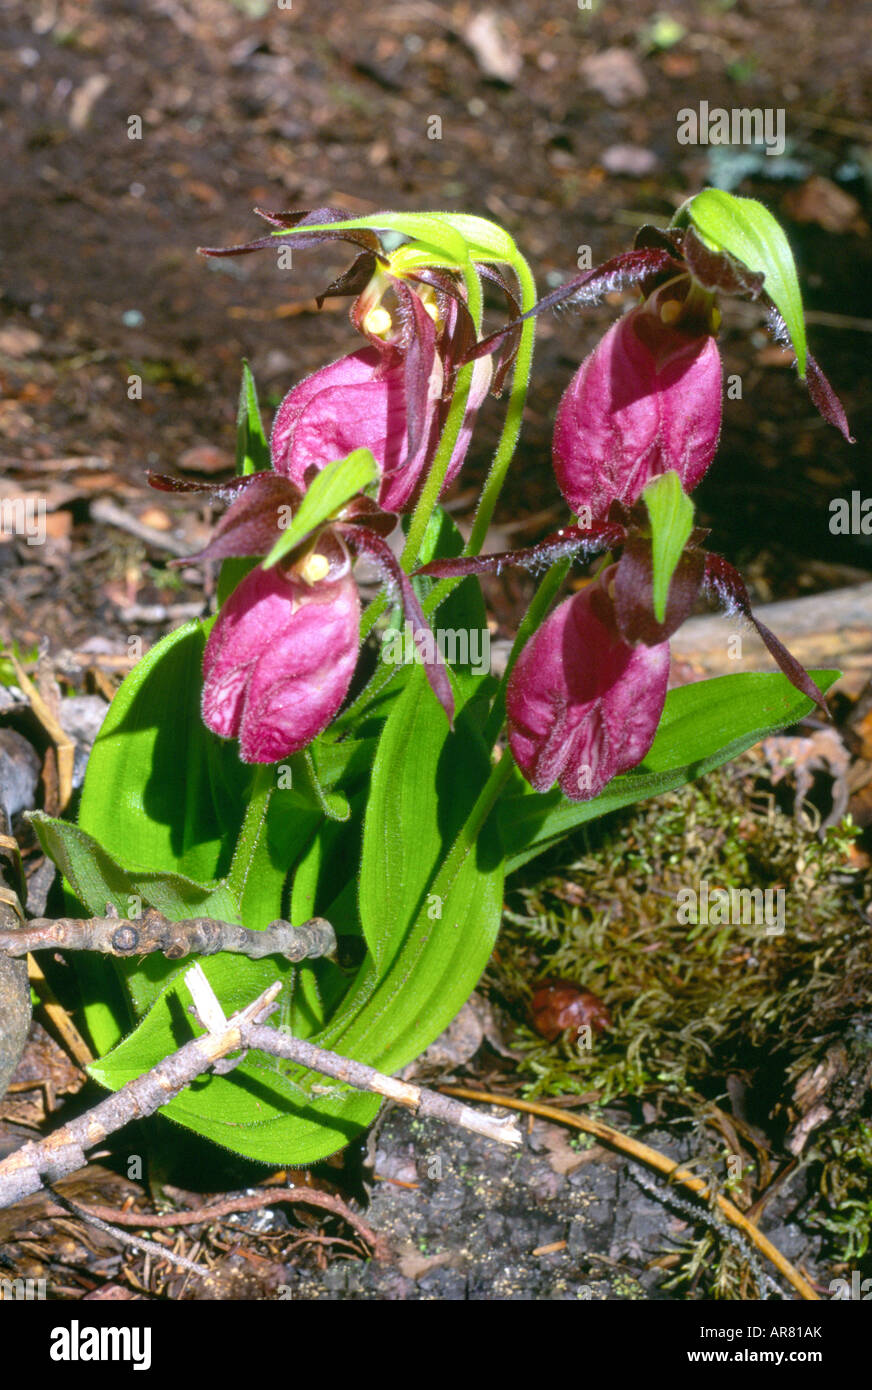 Four [Lady's Slipper] orchids Stock Photo